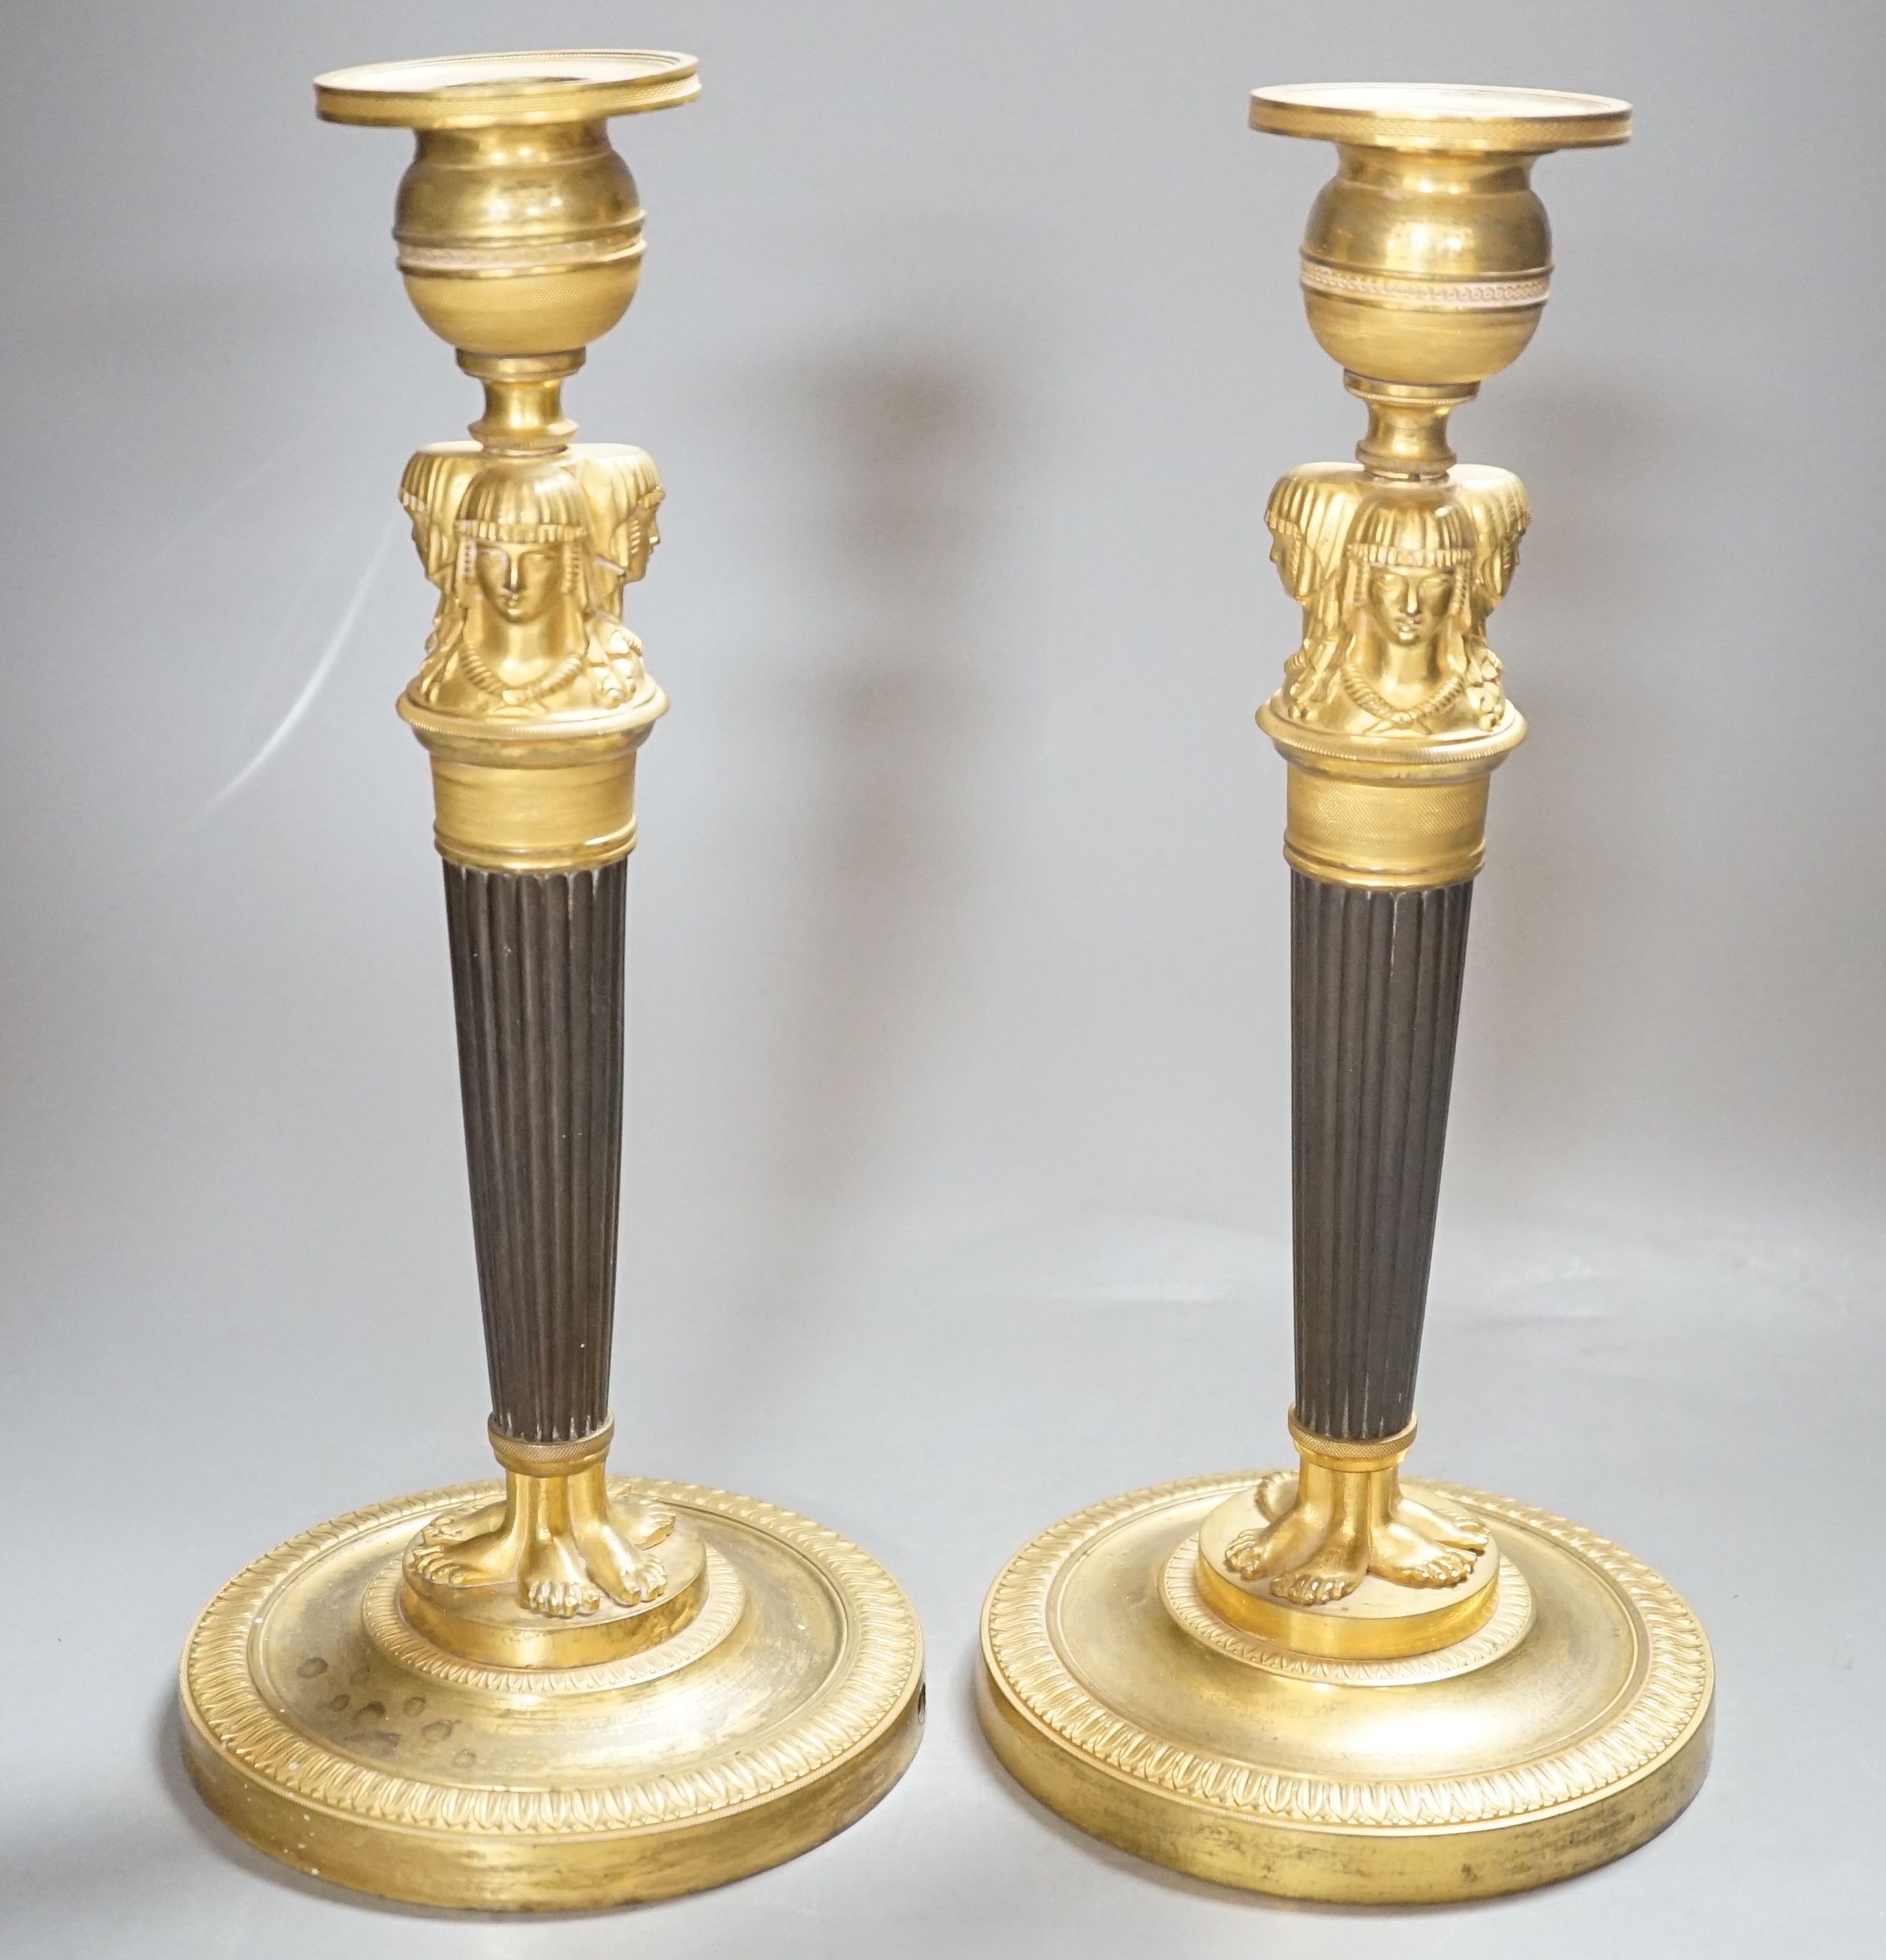 A pair of Empire style bronze and ormolu candlesticks - 29.5cm tall